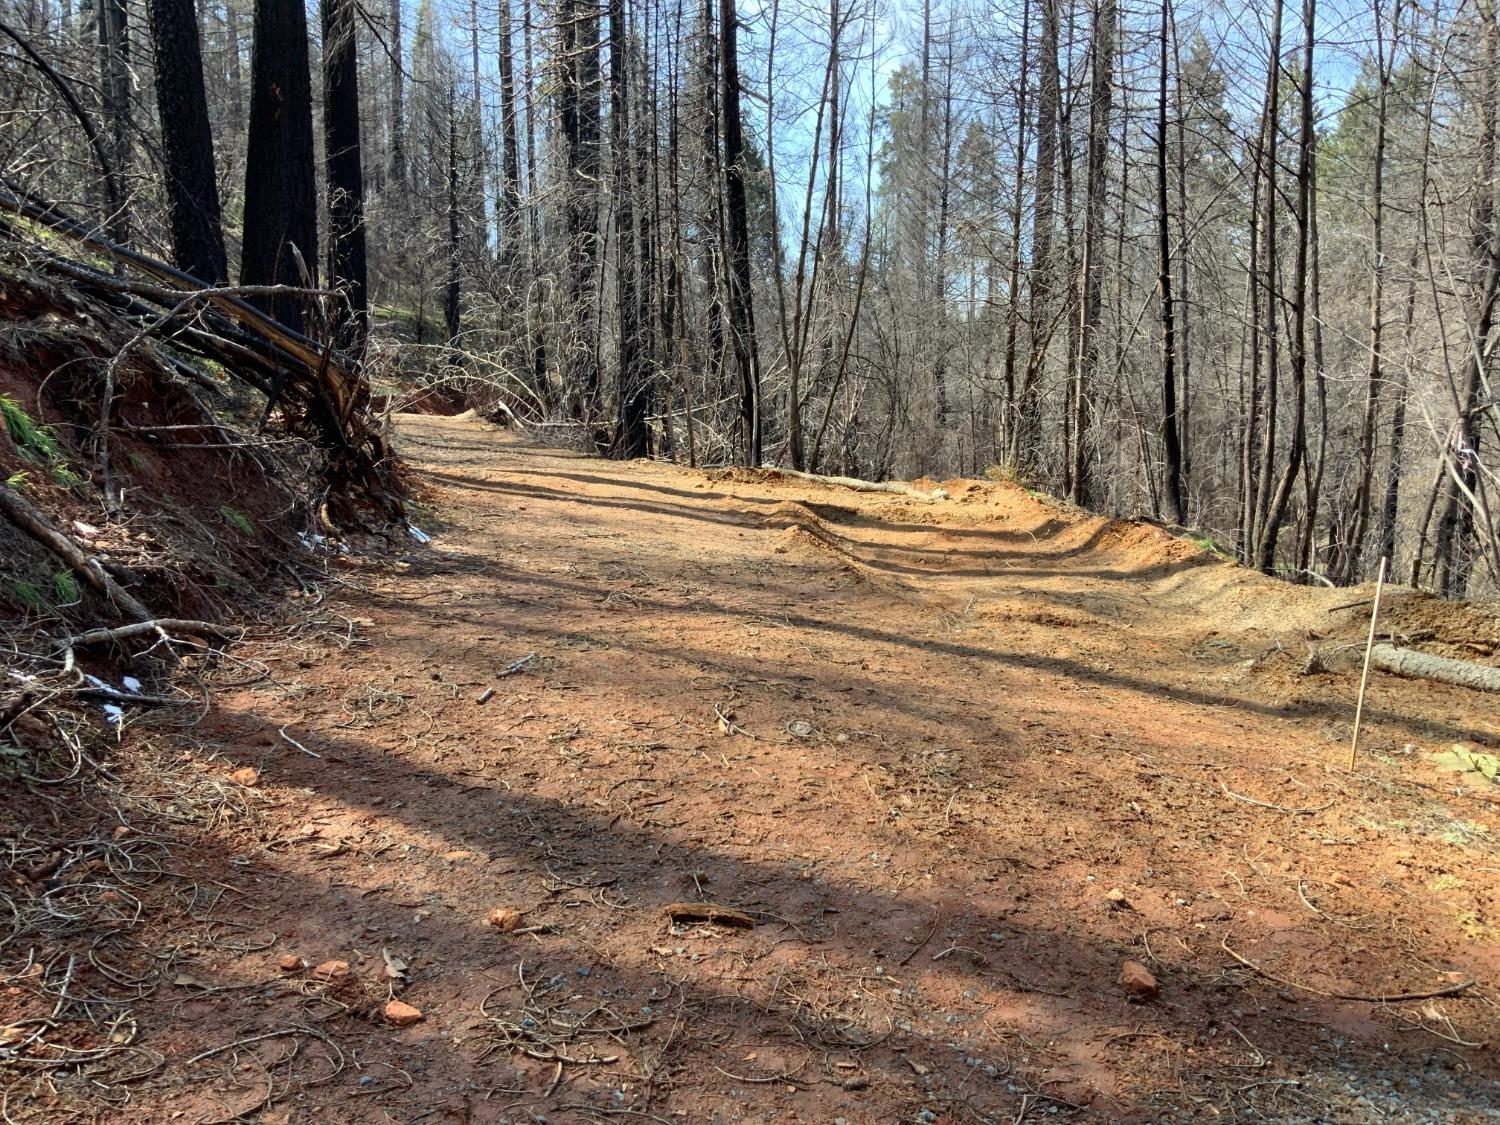 Excellent opportunity to build your dream home in the mountains. Historical El Dorado County has so much to offer. Enjoy numerous recreational actives all with in a short distance. The secluded lot offers privacy and a beautiful natural setting.